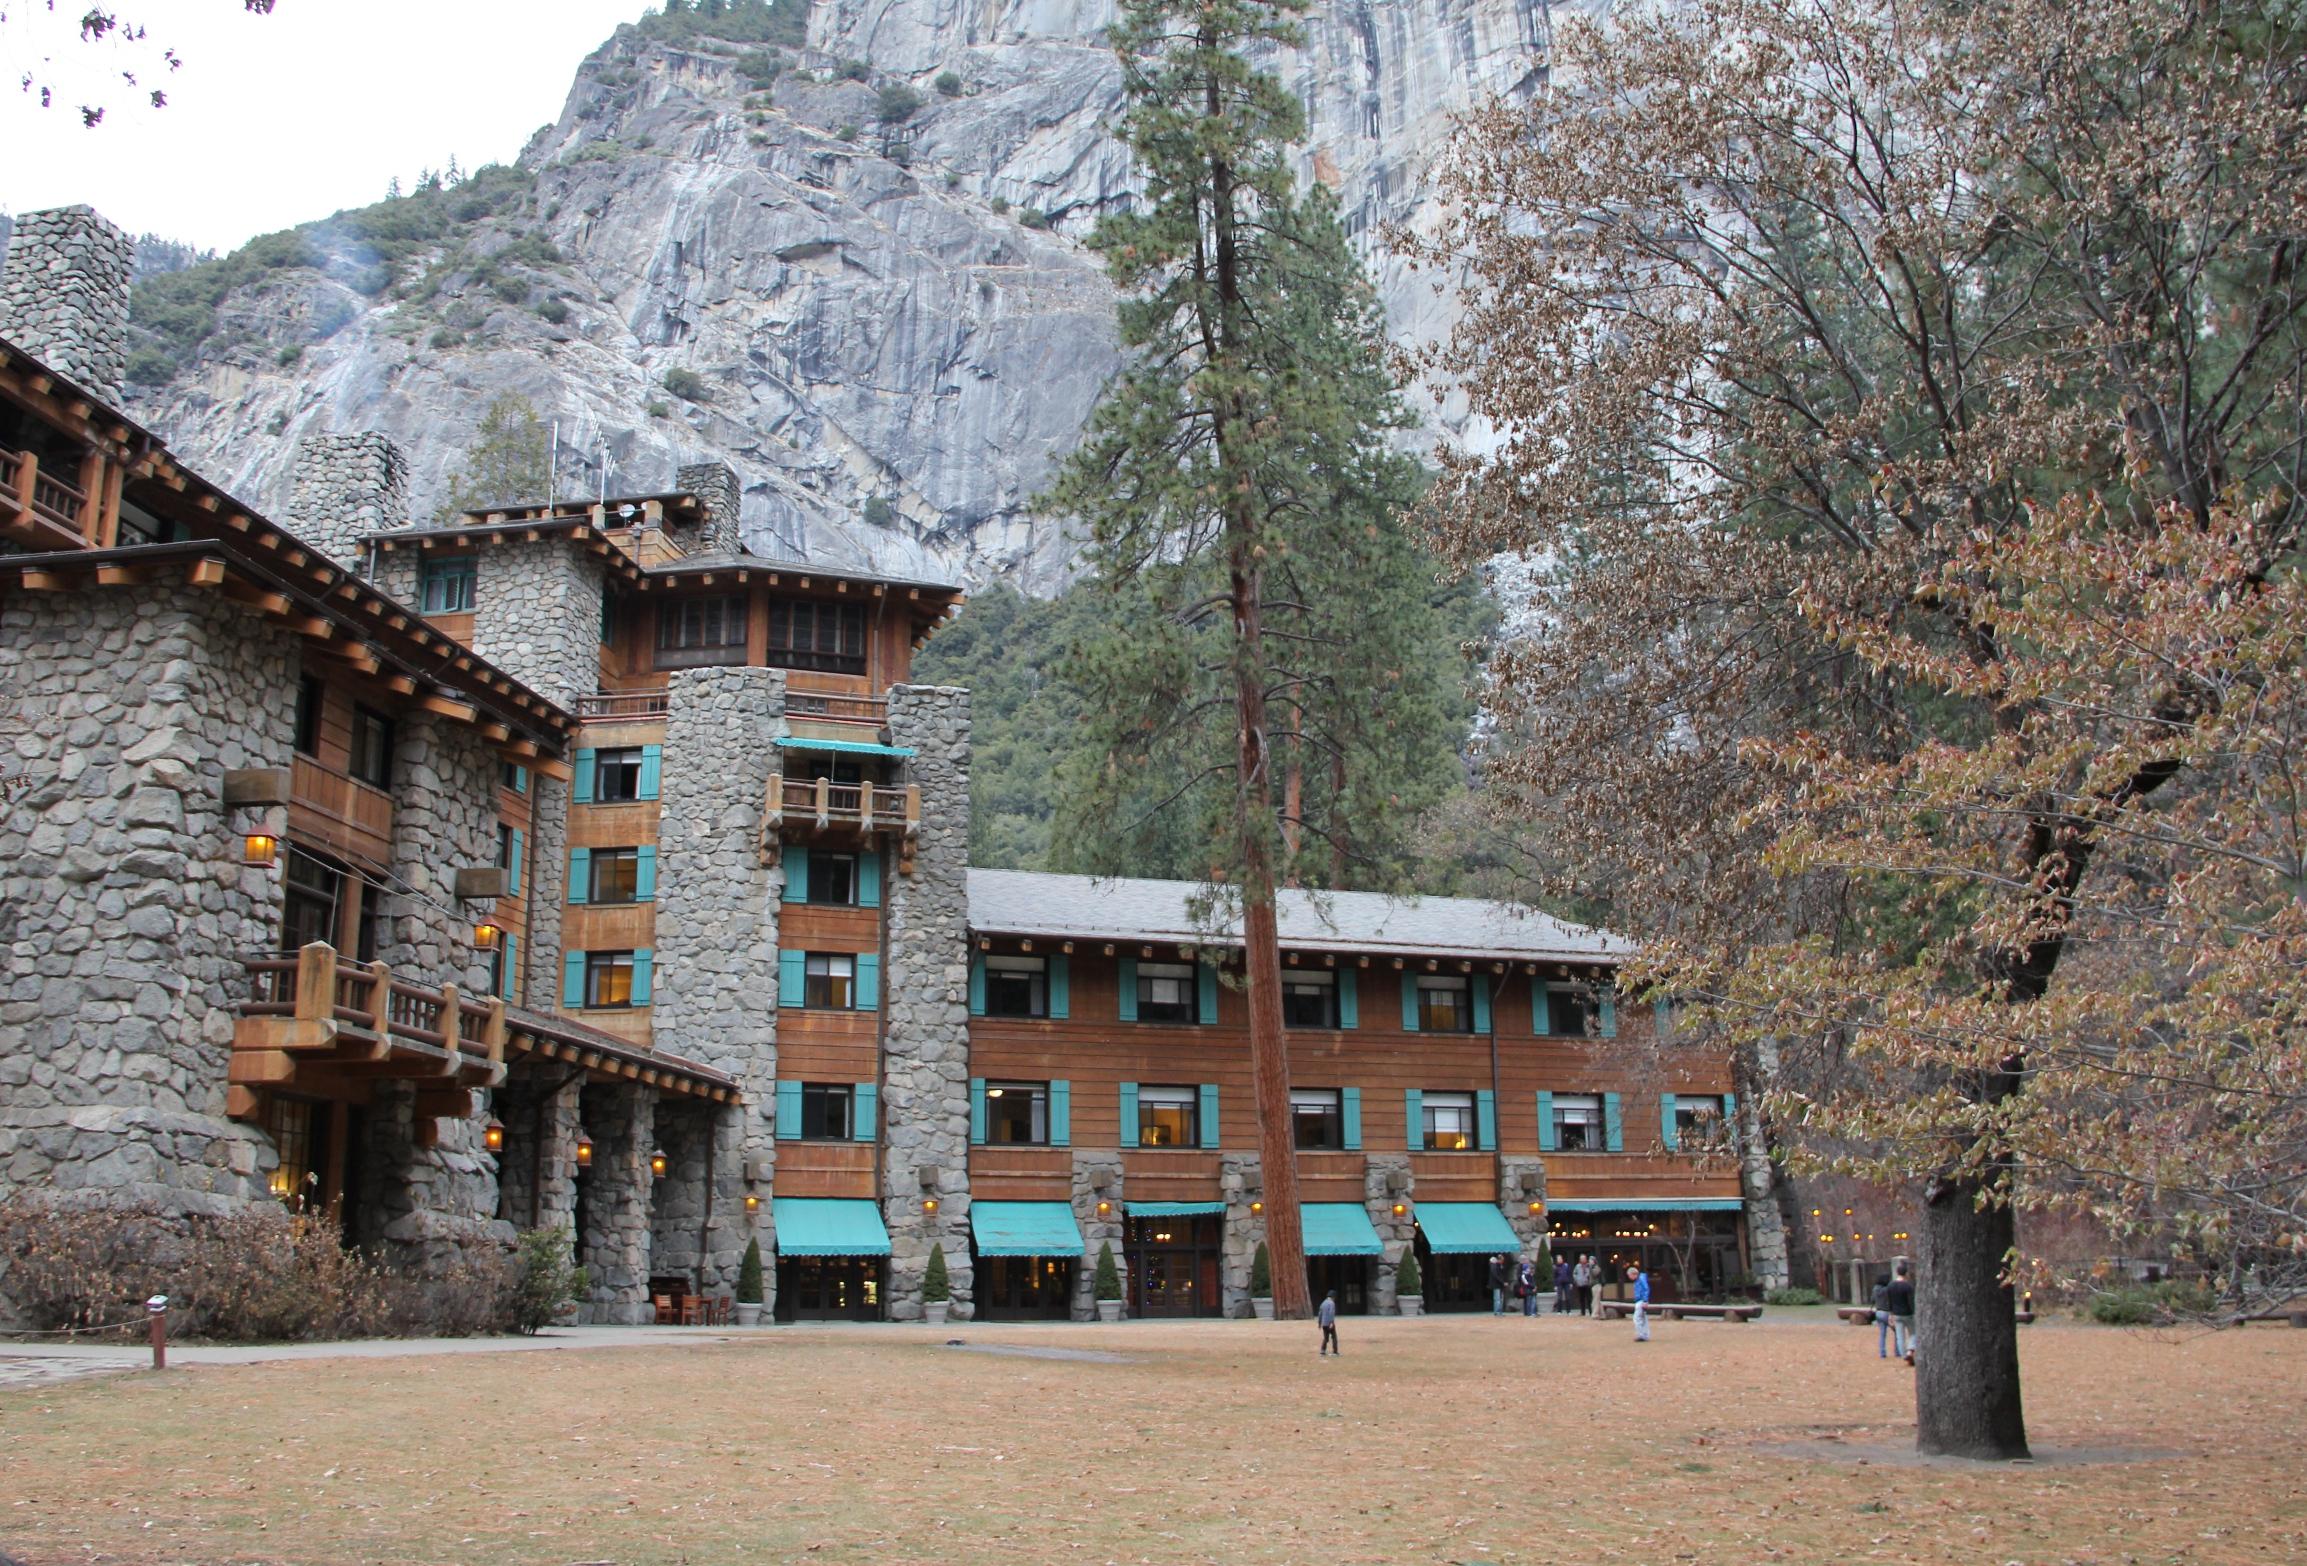 yosemite-s-ahwahnee-hotel-other-attractions-to-get-new-names-valley